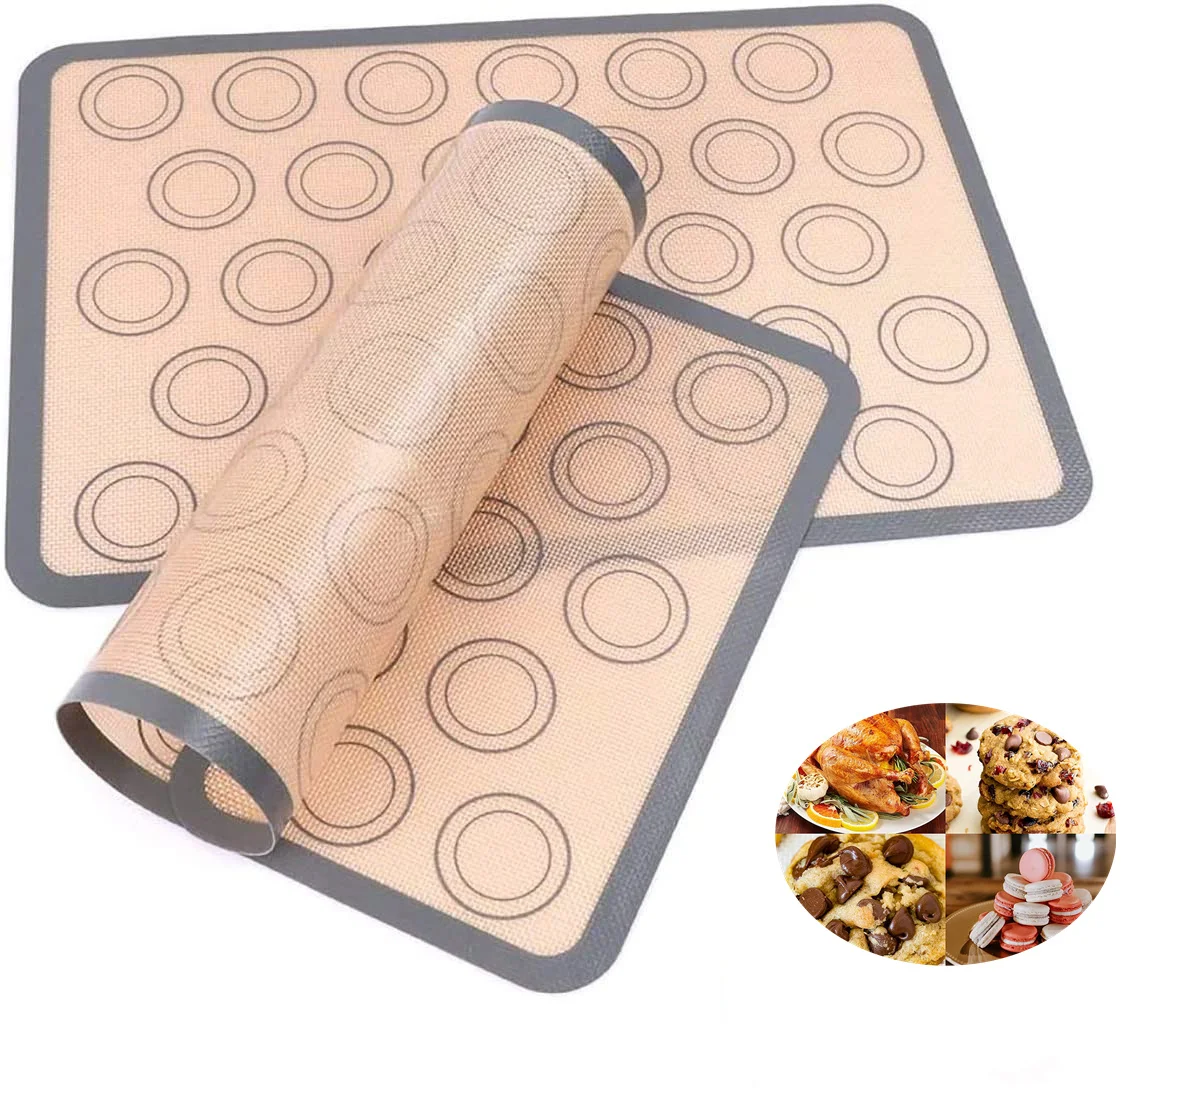 

Silicone Macaron Baking Mat Non-Stick Silicon Liner Bake Pans Oven Mat Rolling Dough Mat for Cake Cookie Baking Accessories